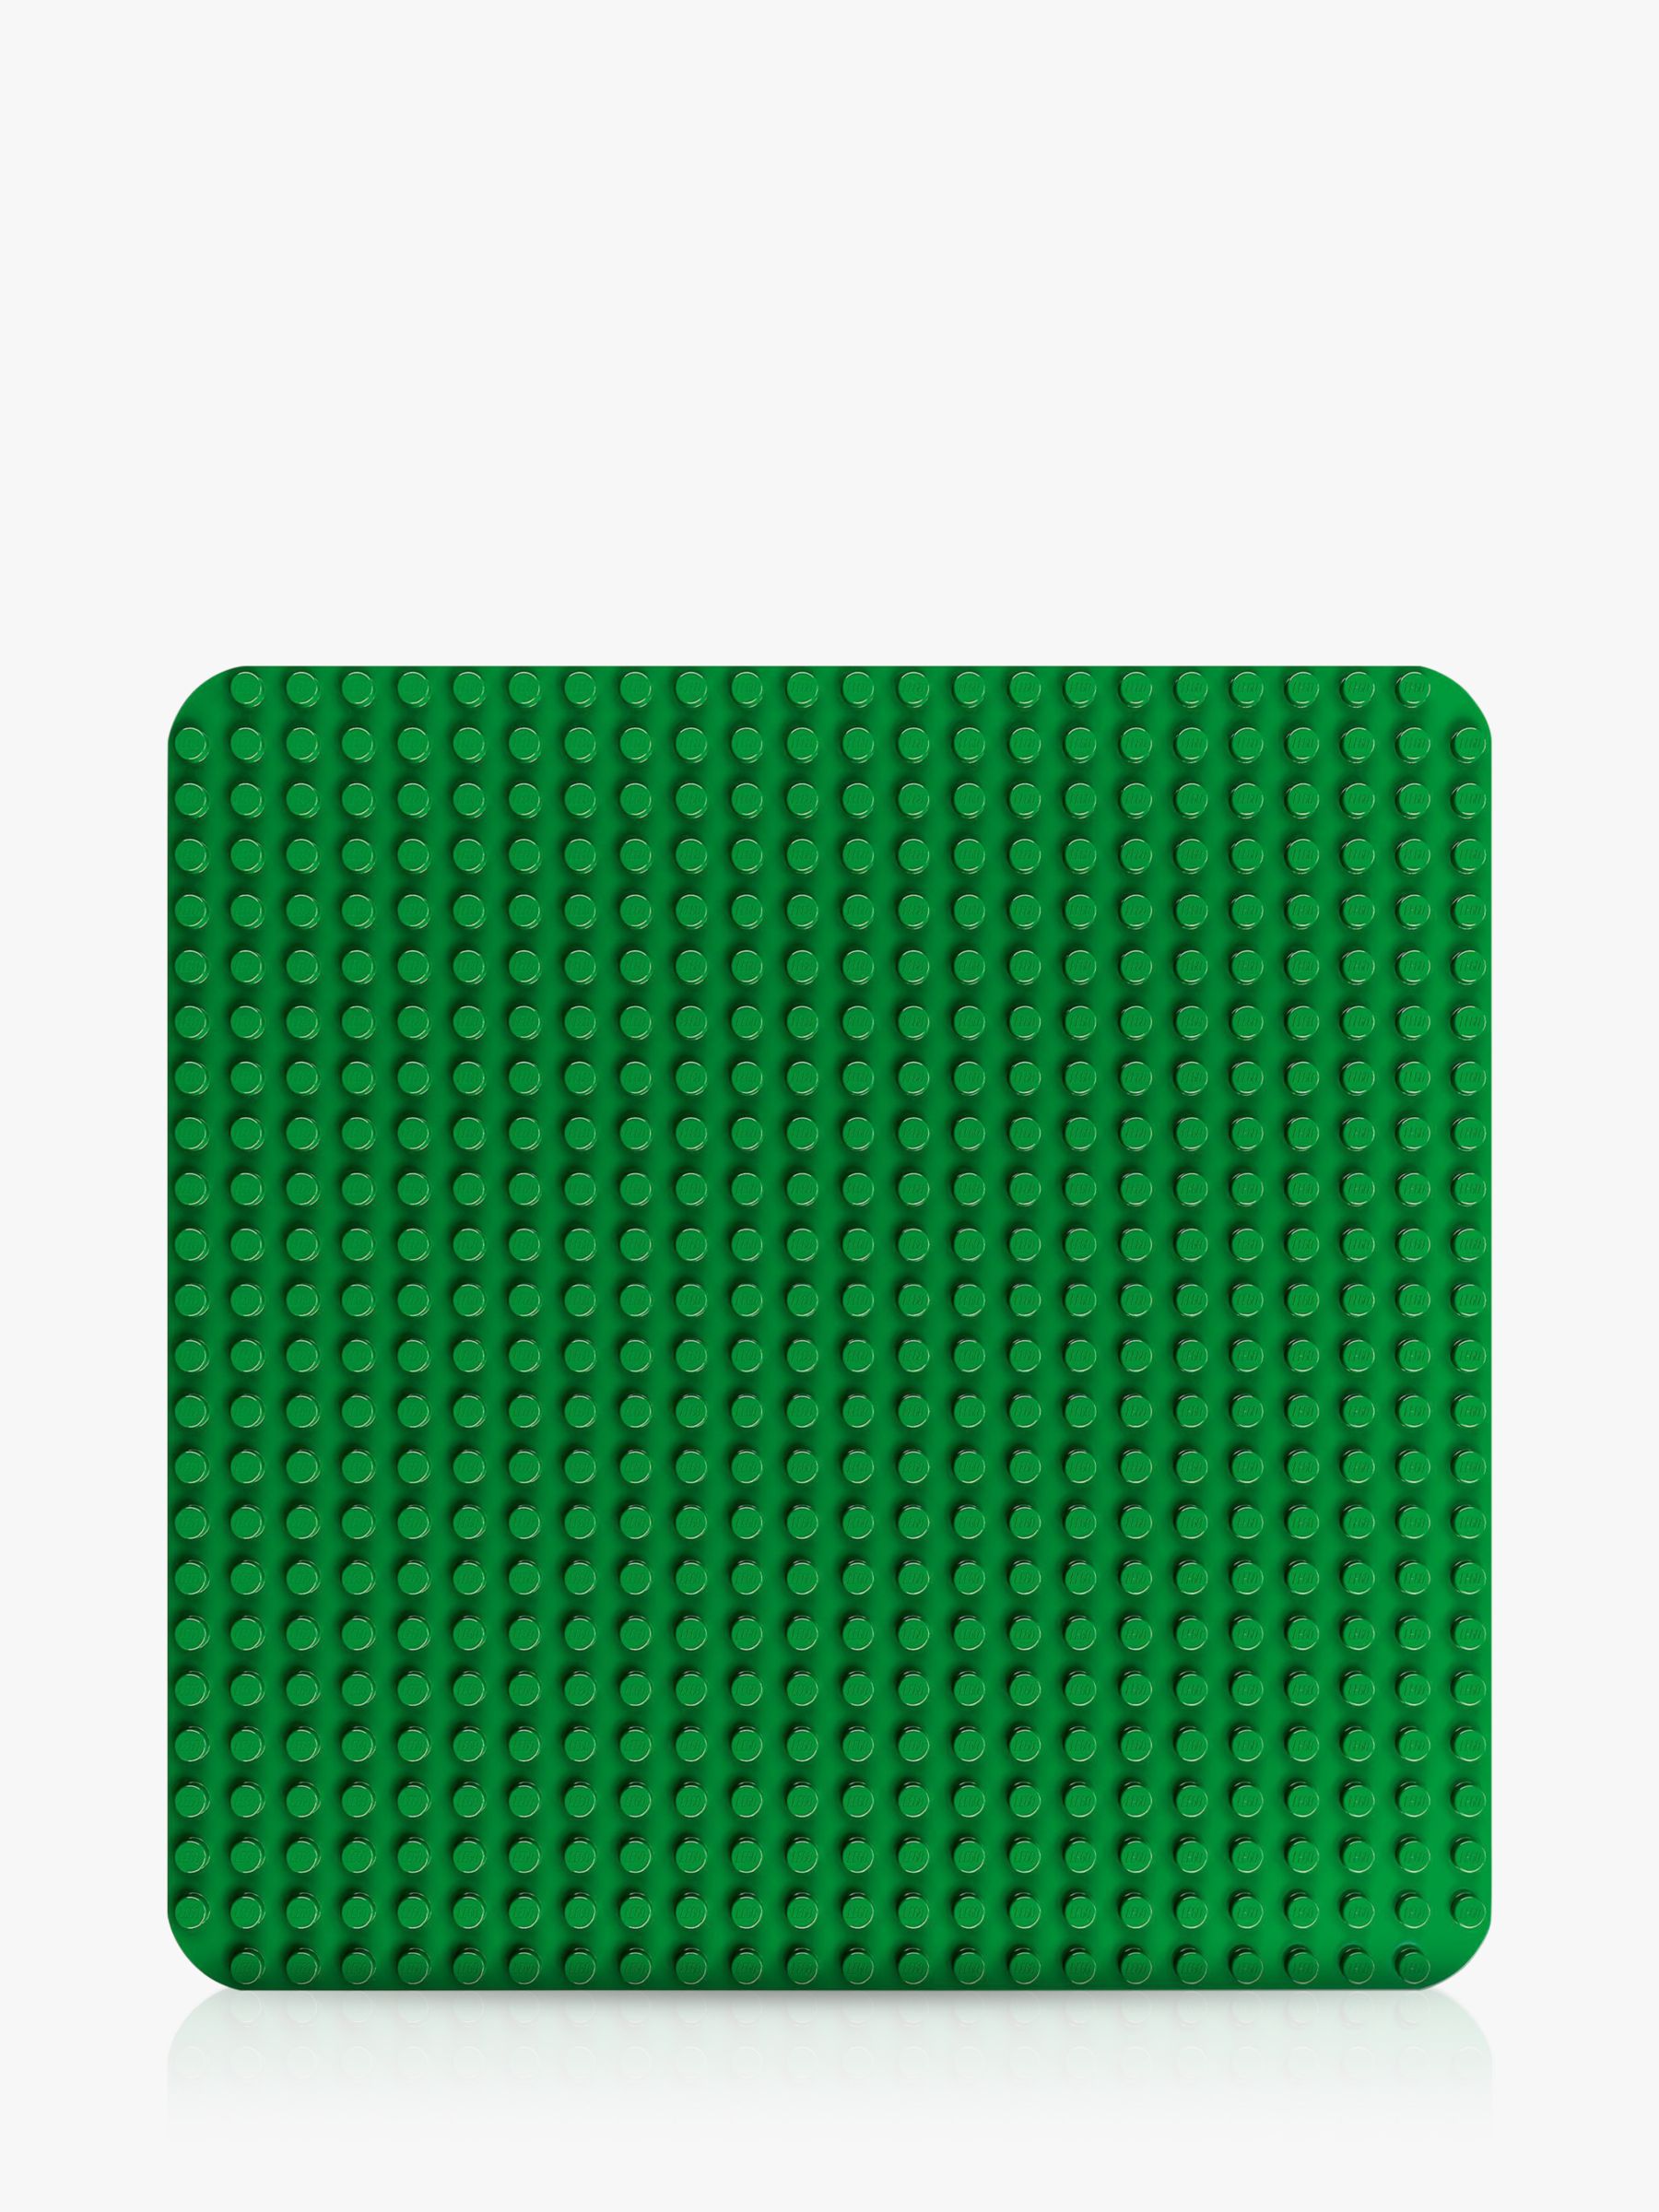 Buy 2 Green 2-Sided Base Plates for Lego & Duplo Builds by Nilo